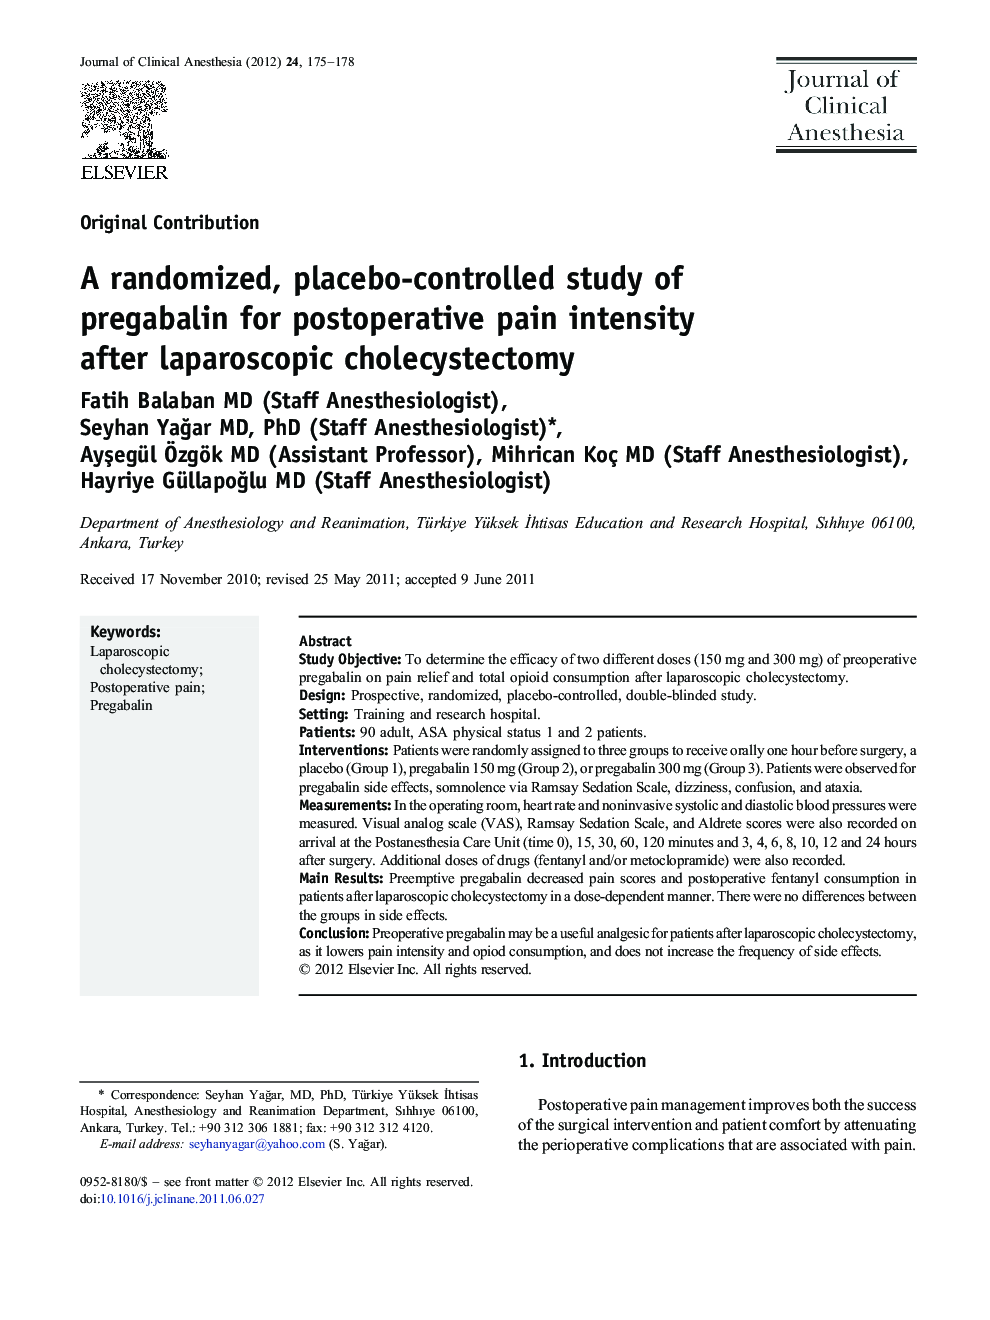 A randomized, placebo-controlled study of pregabalin for postoperative pain intensity after laparoscopic cholecystectomy